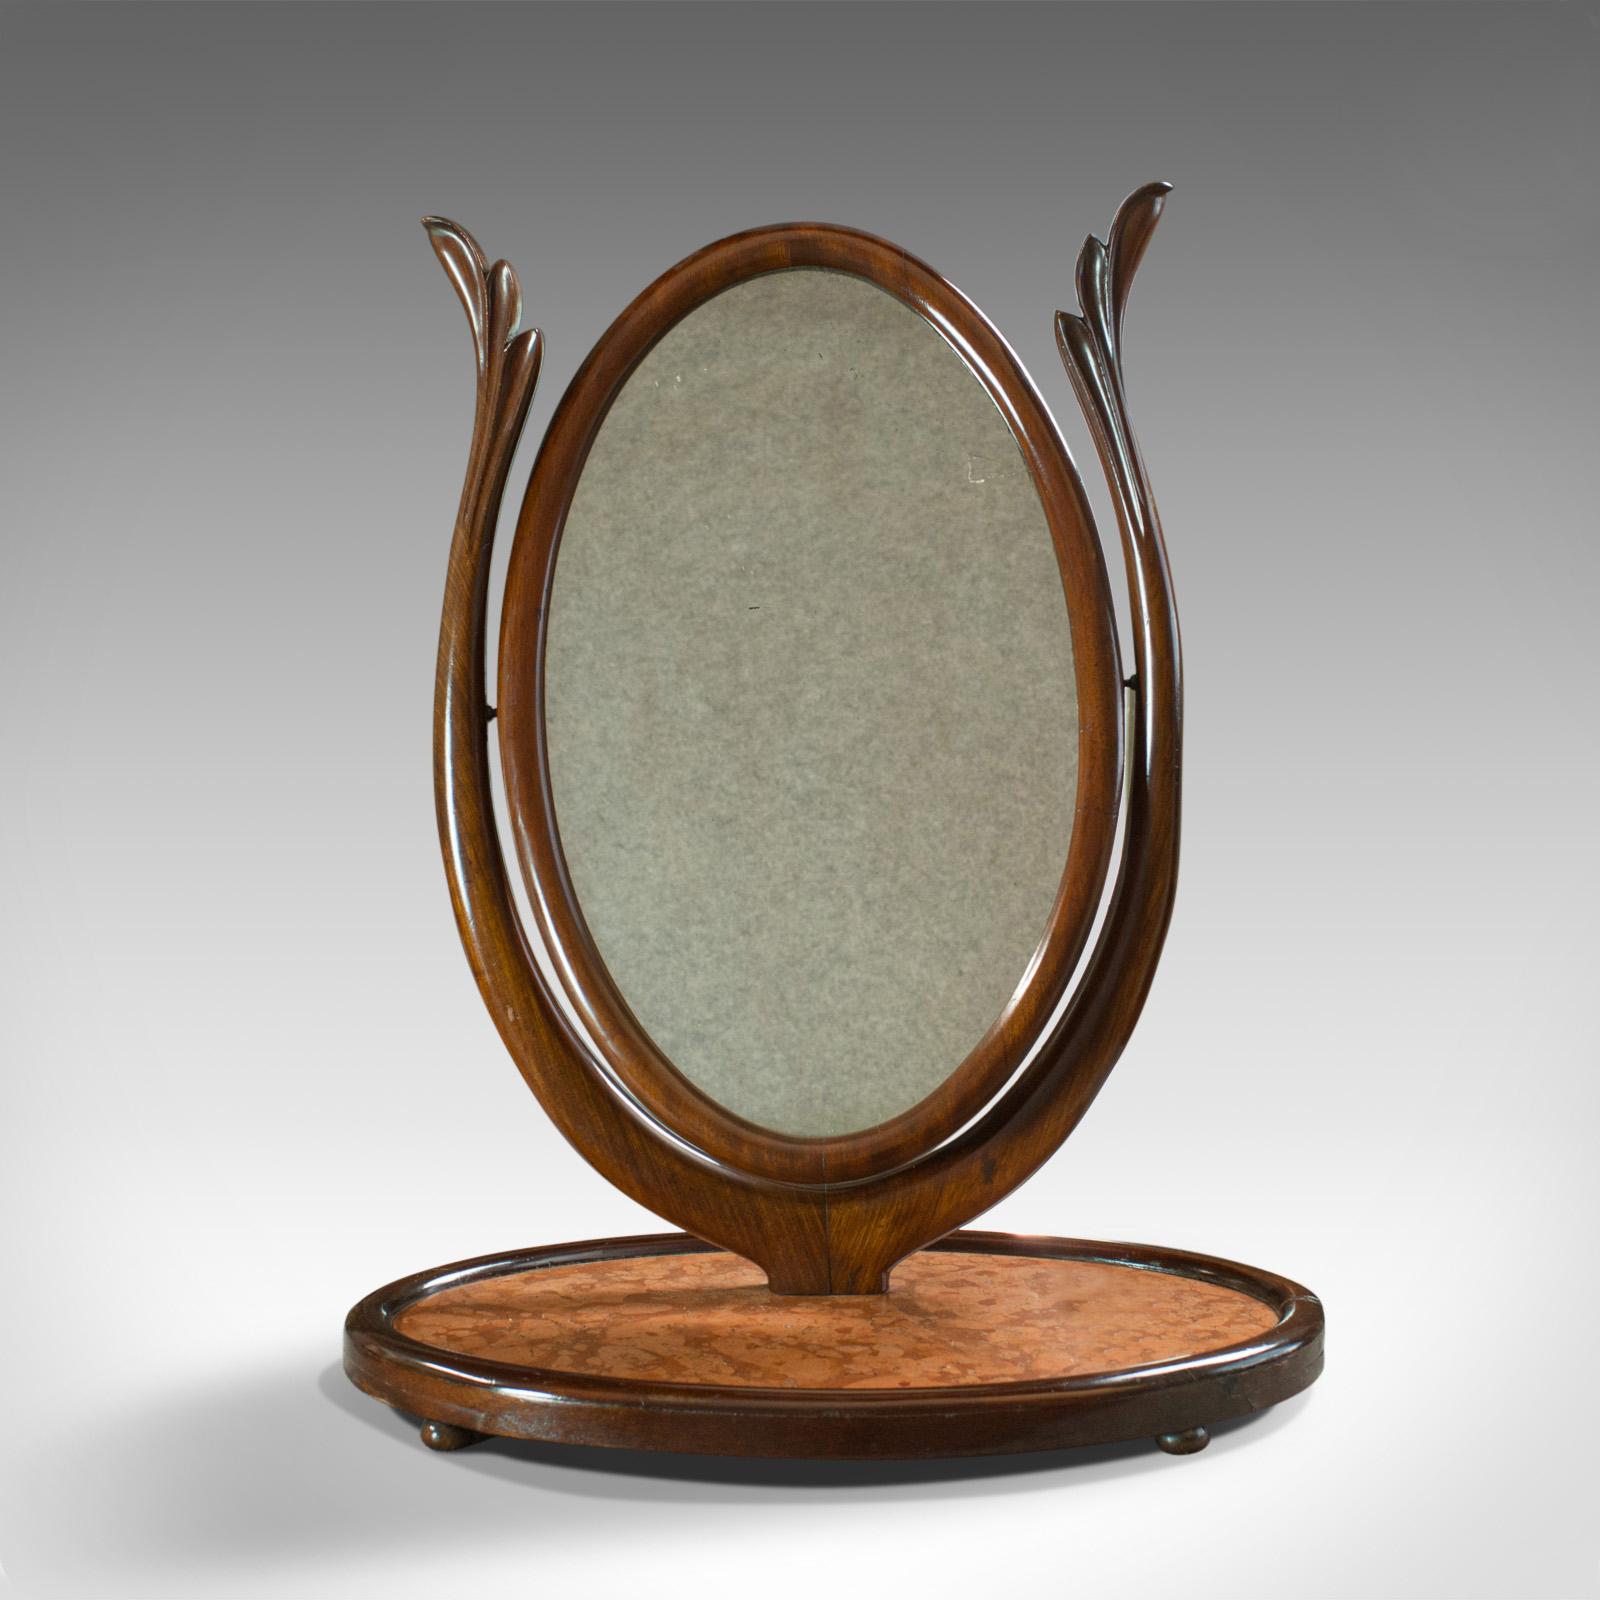 This is an antique platform mirror. An English, Regency, mahogany, vanity, toilet swing mirror dating to the mid-19th century, circa 1830.

Quality mahogany with rich colour and fine grain interest
Standing upon an inset marble platform, well